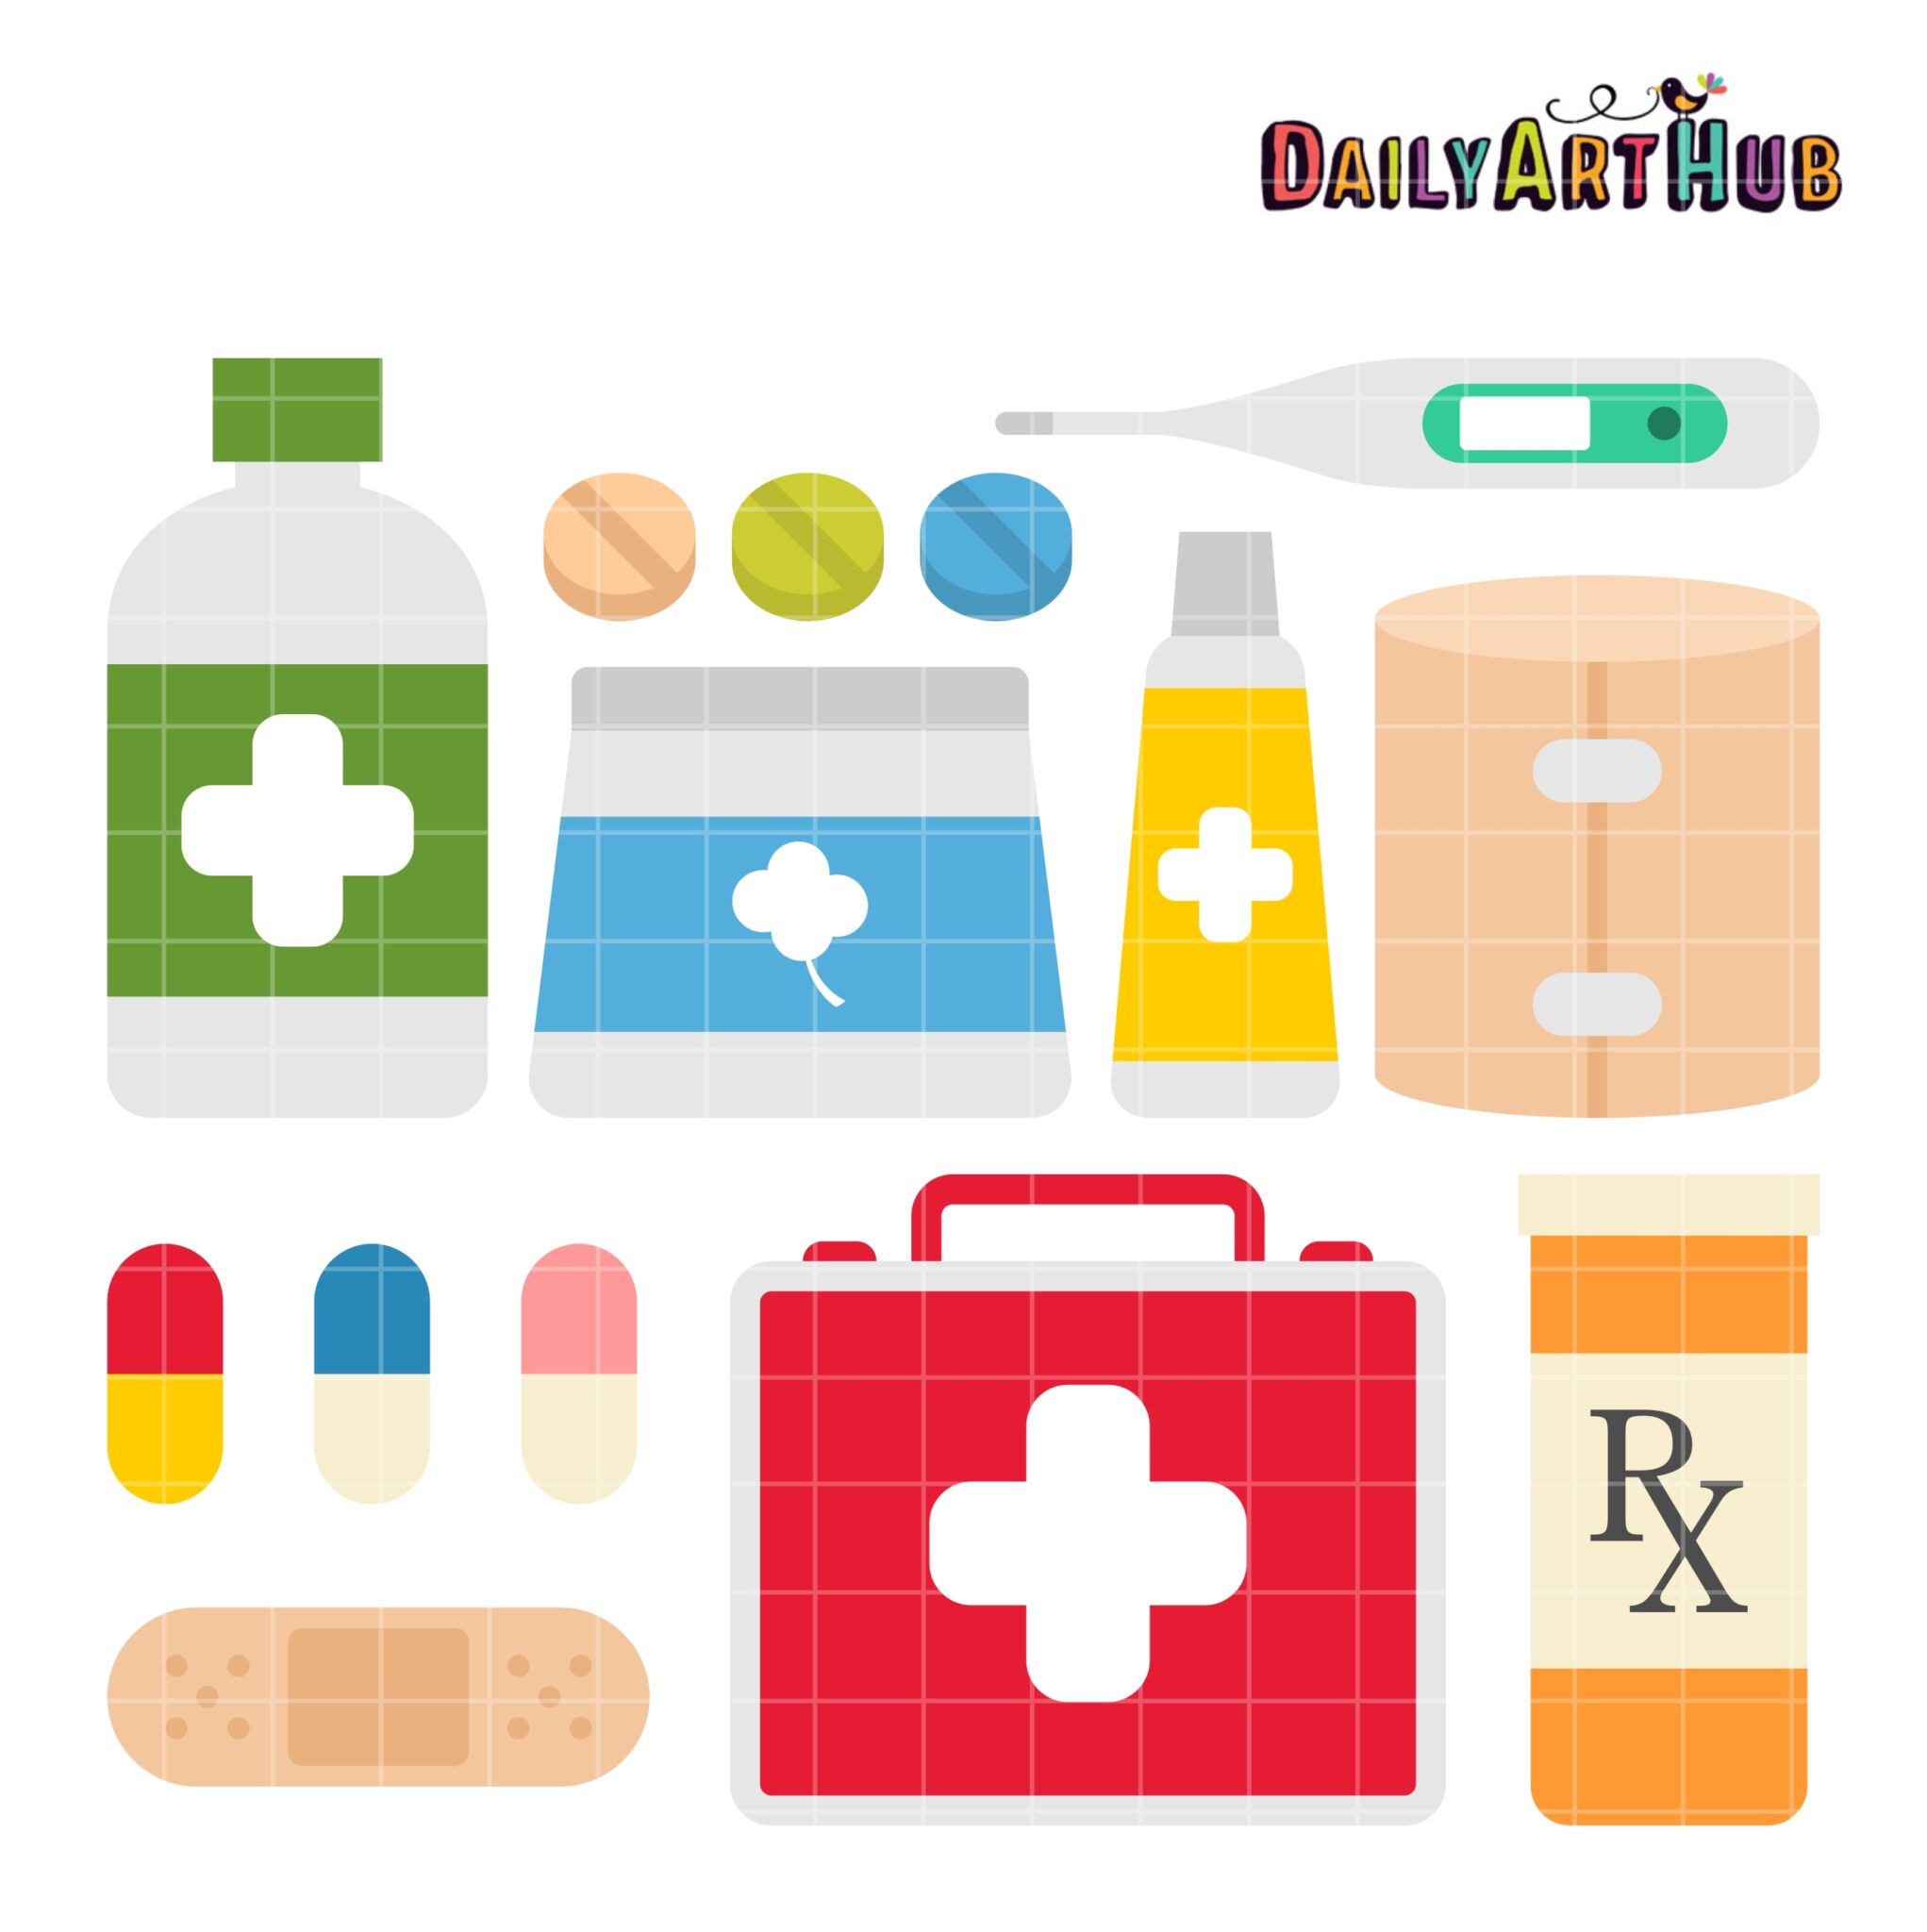 first aid box clipart images